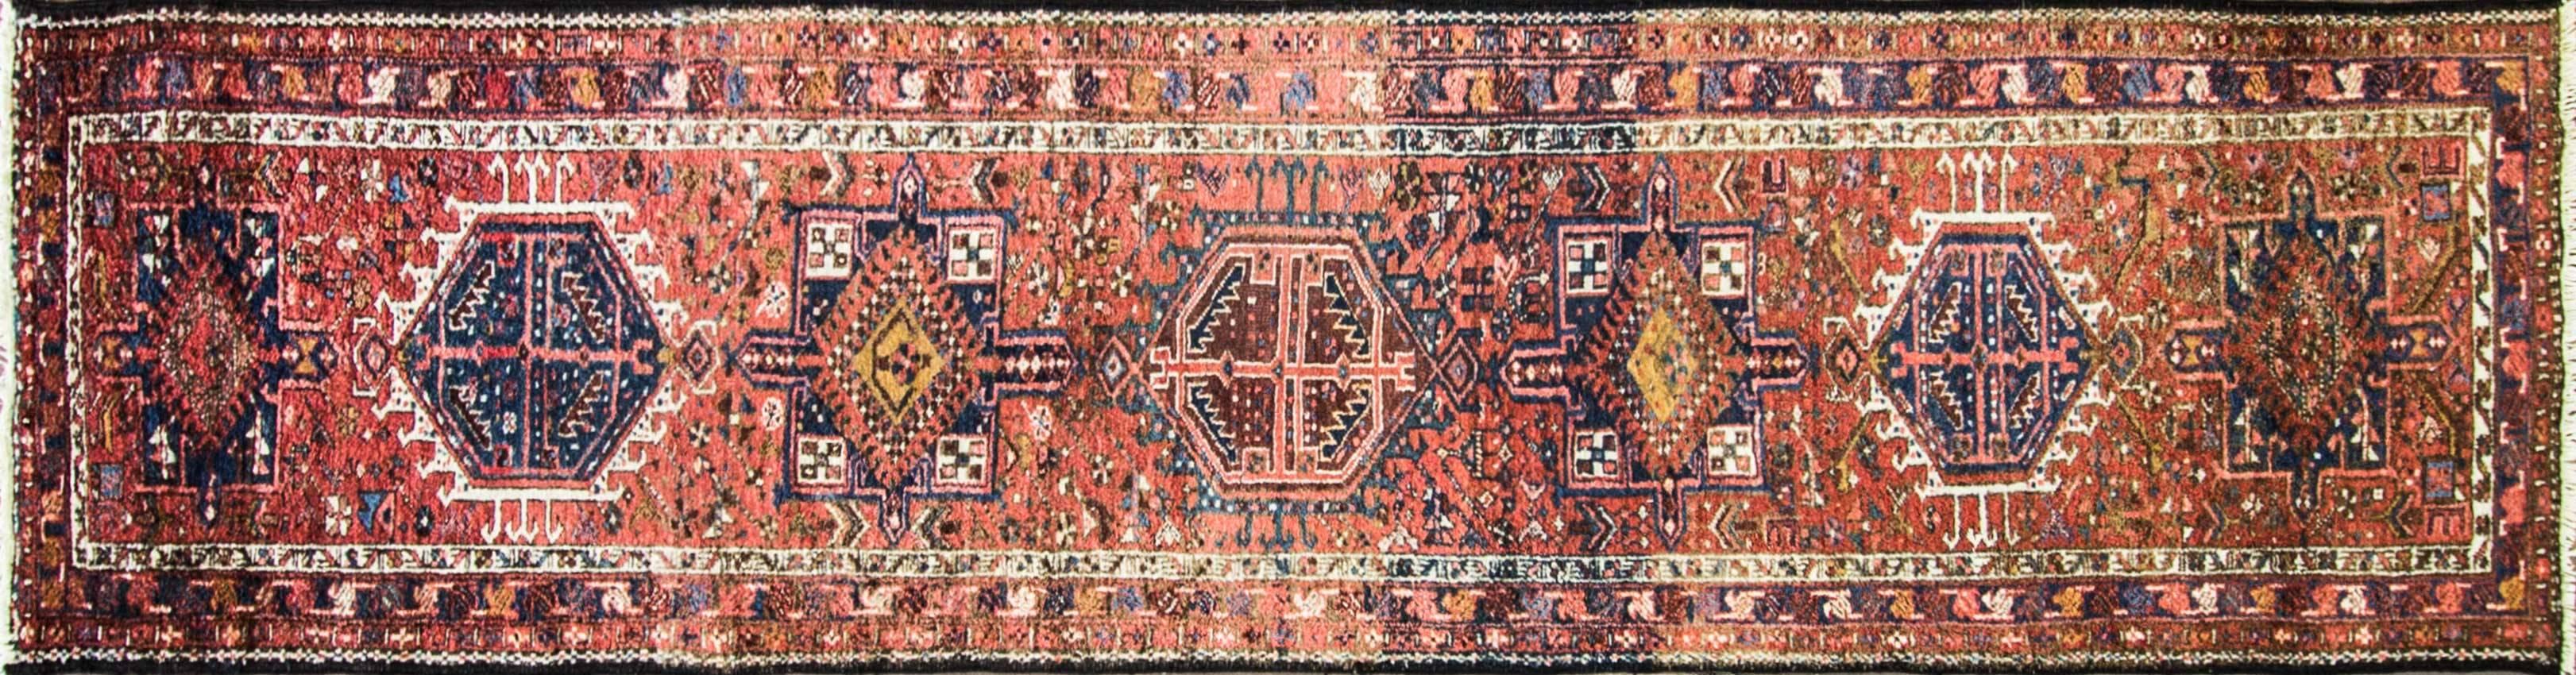 Karajah, Heriz, Serapi, Bakshaish. Karaja and Serapi or Bakshaish all are villages in the district of Heriz north west Persia. Since mid-19th century rugs from these area imported to US and European market. This Karaja rug like many other antique